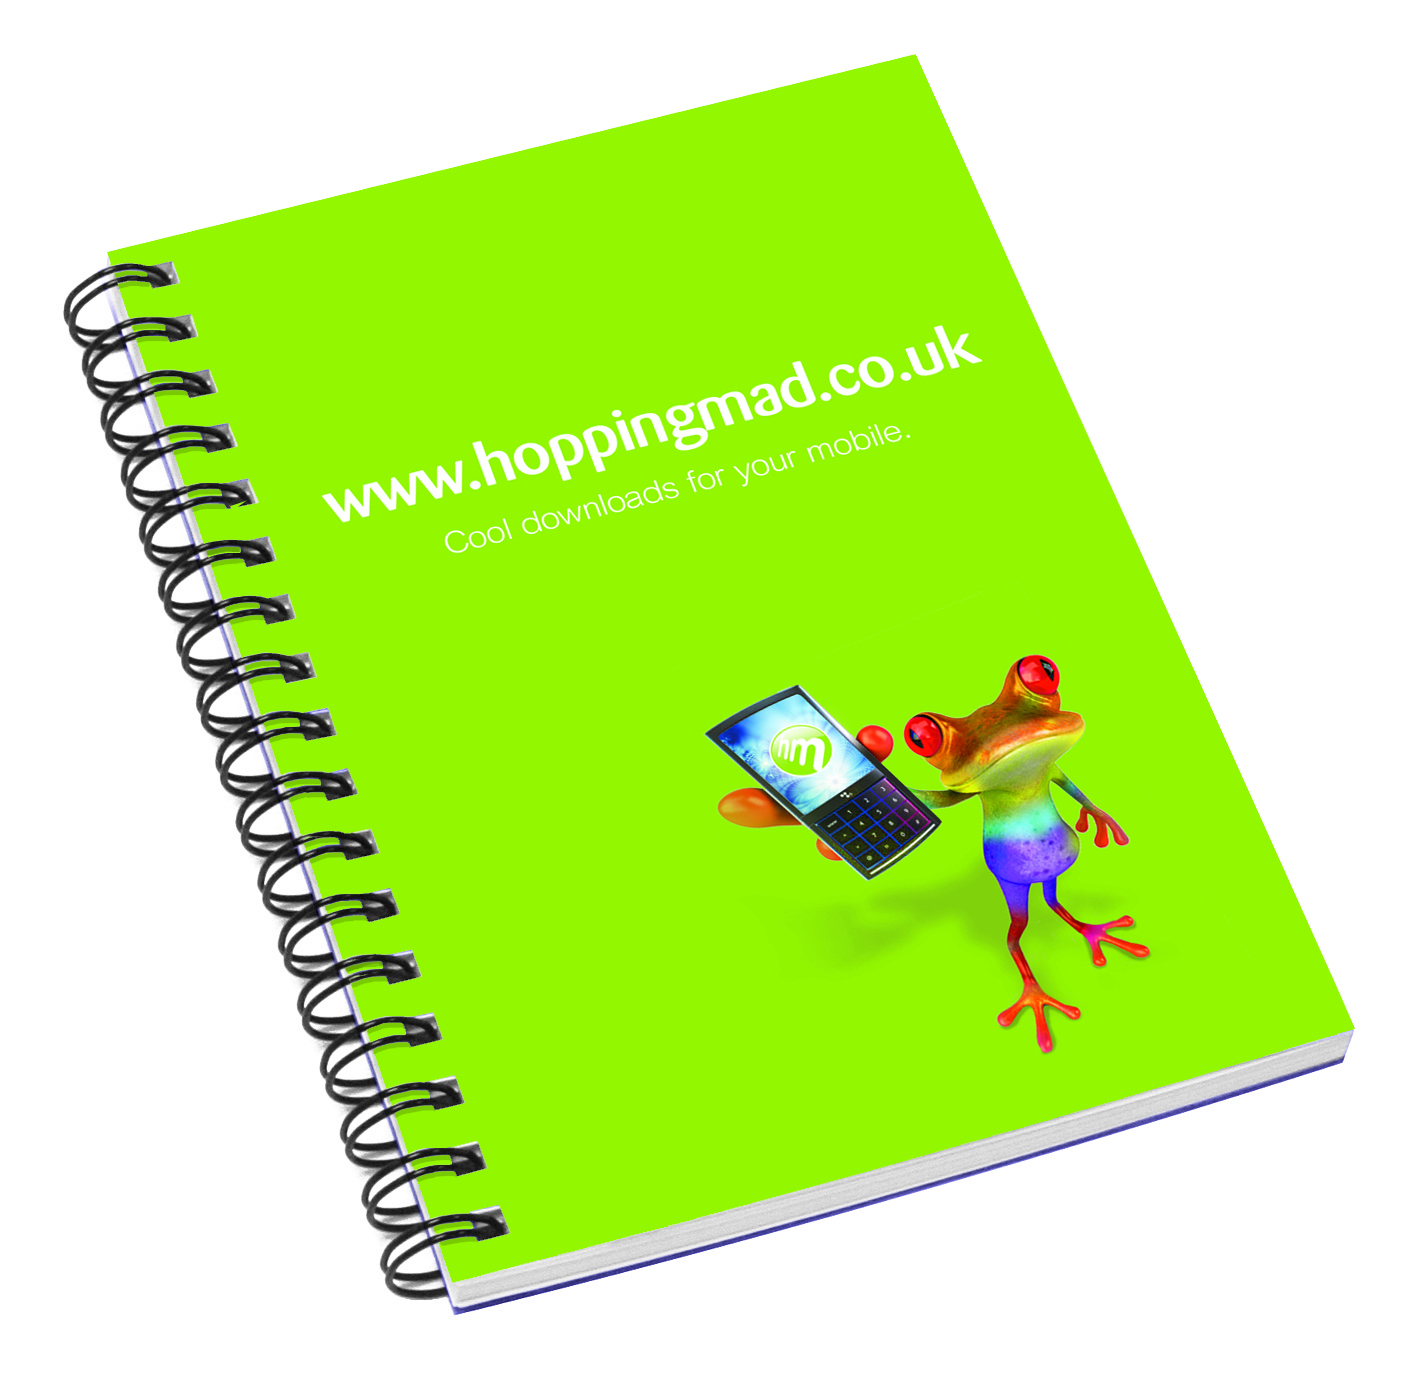 Wiro Smart Spiral notebook with full colour print on front cover